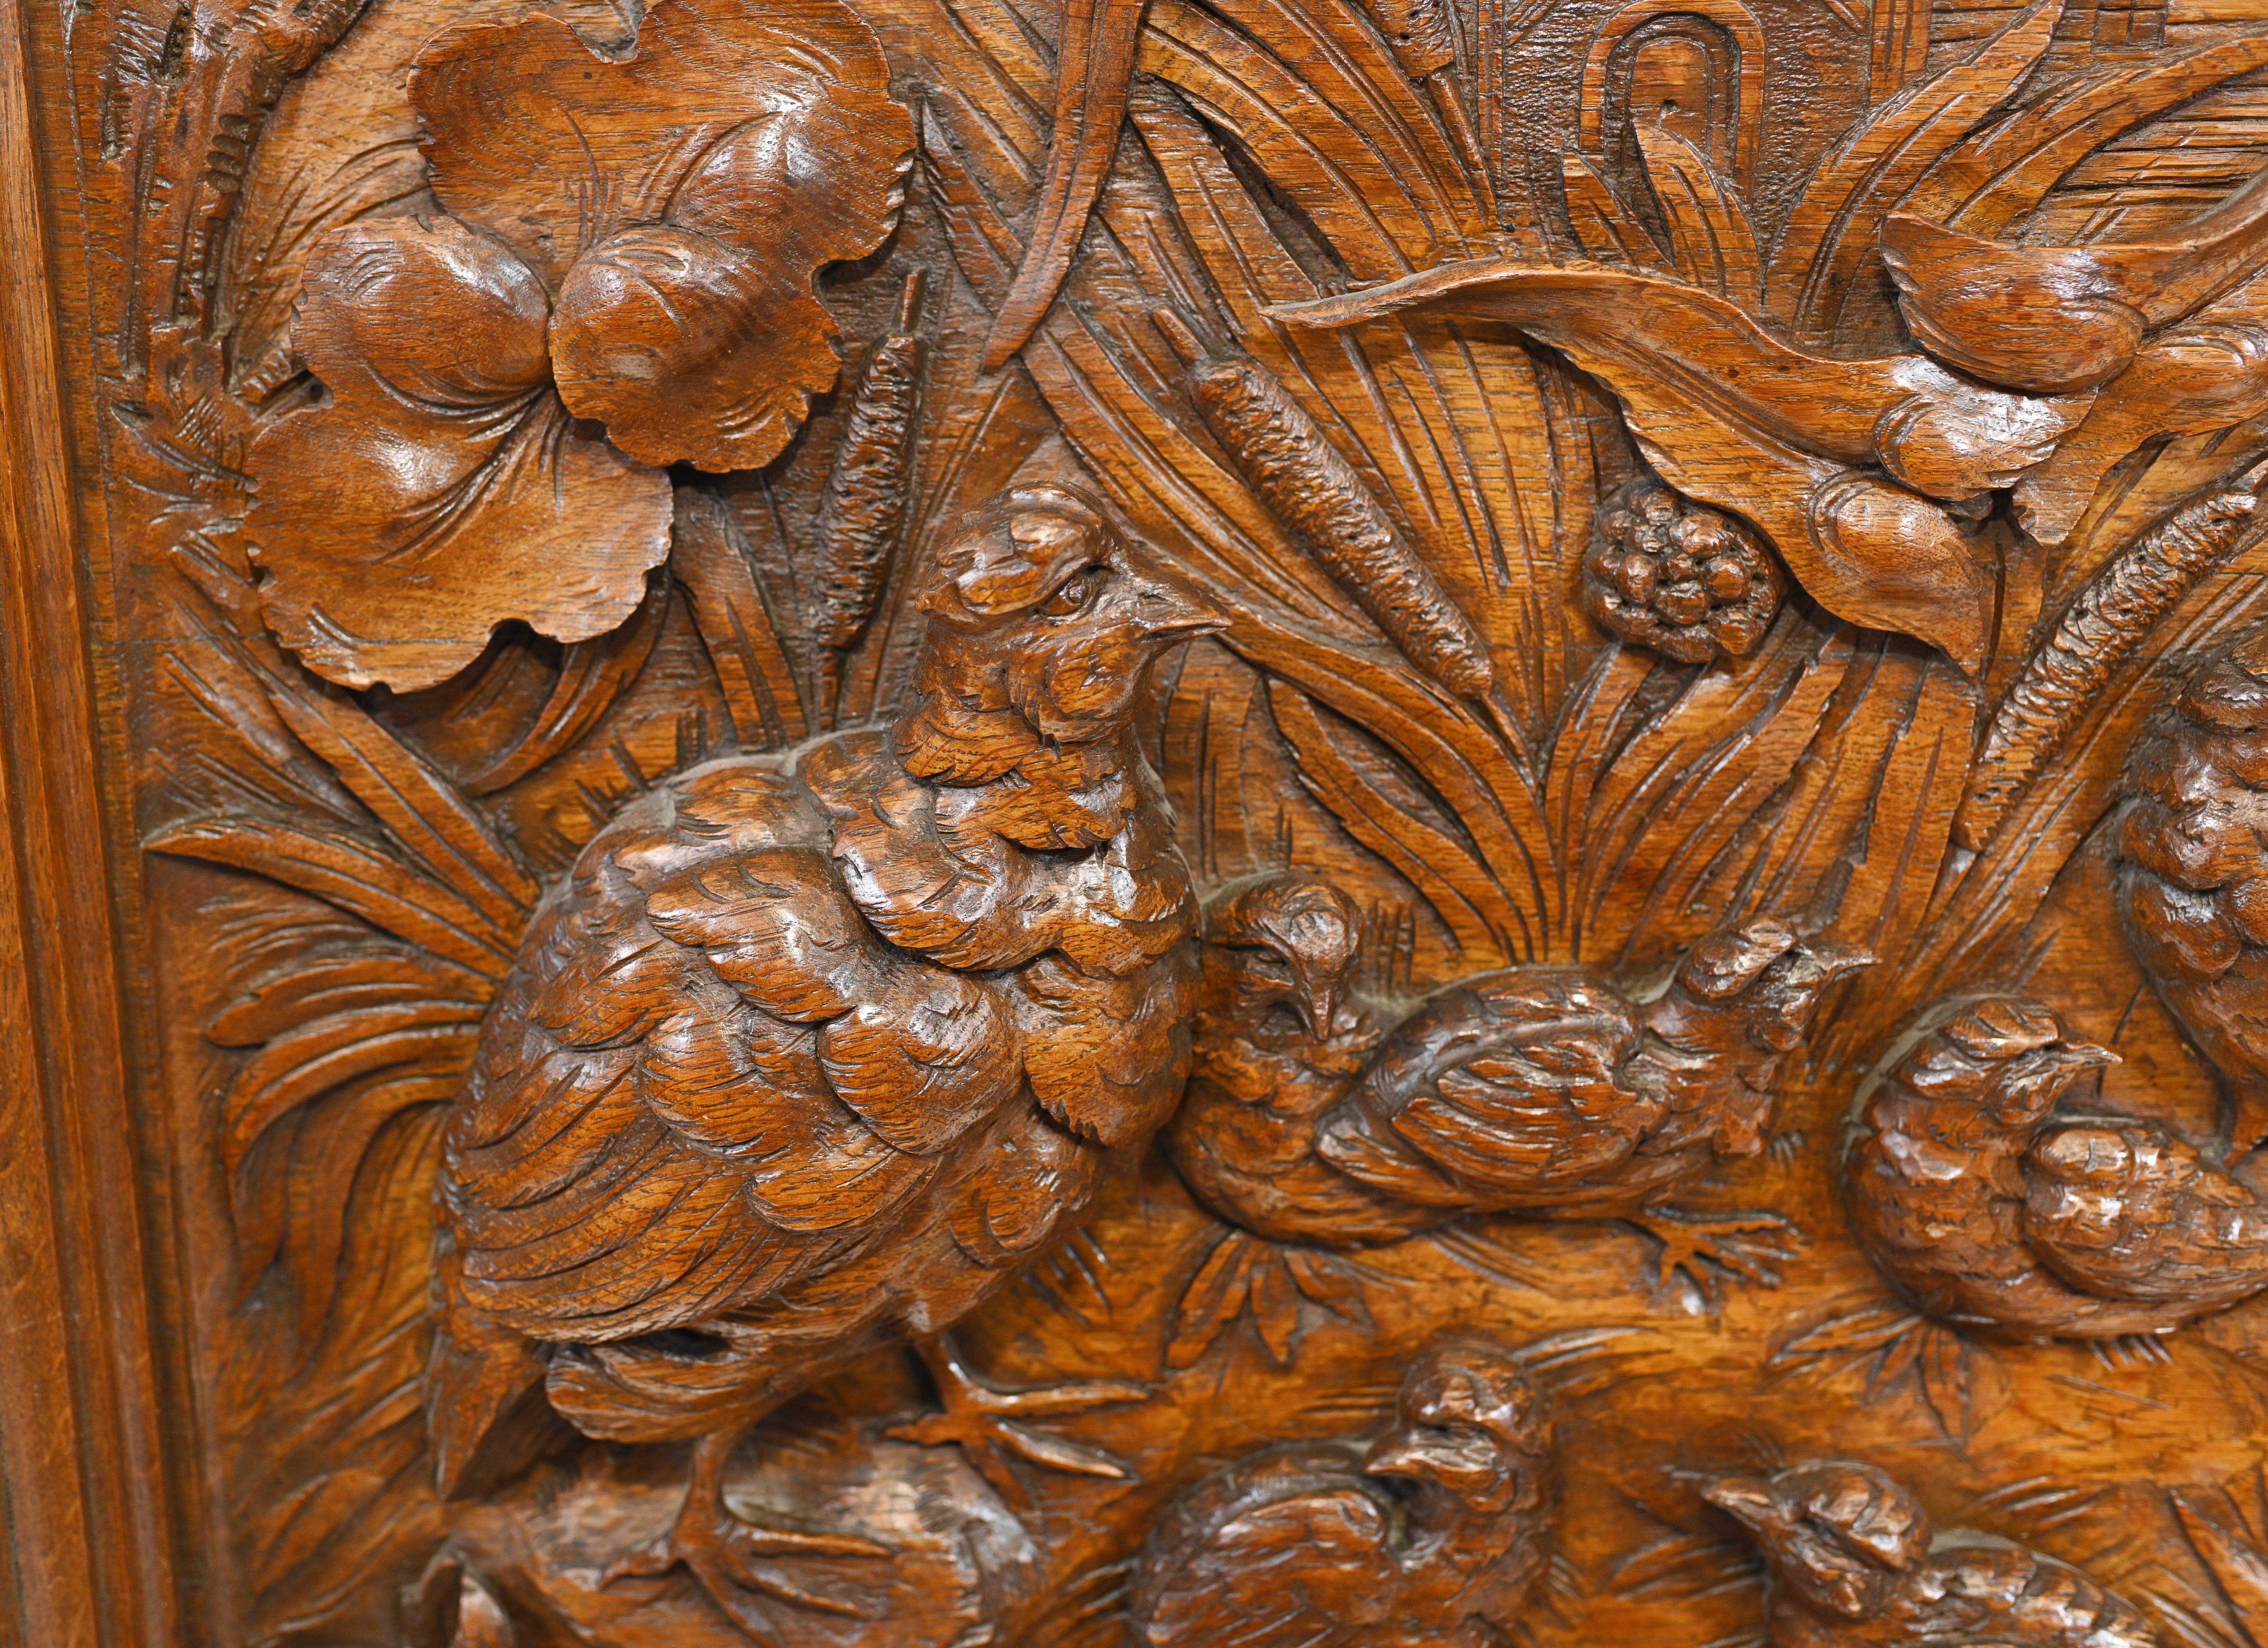 Highly collectable German Black Forest carved wall hanging
We date this sought after antique to circa 1840
An important Black Forest finely deep carved walnut wall decoration depicting game birds with their young 
The details and quality to the